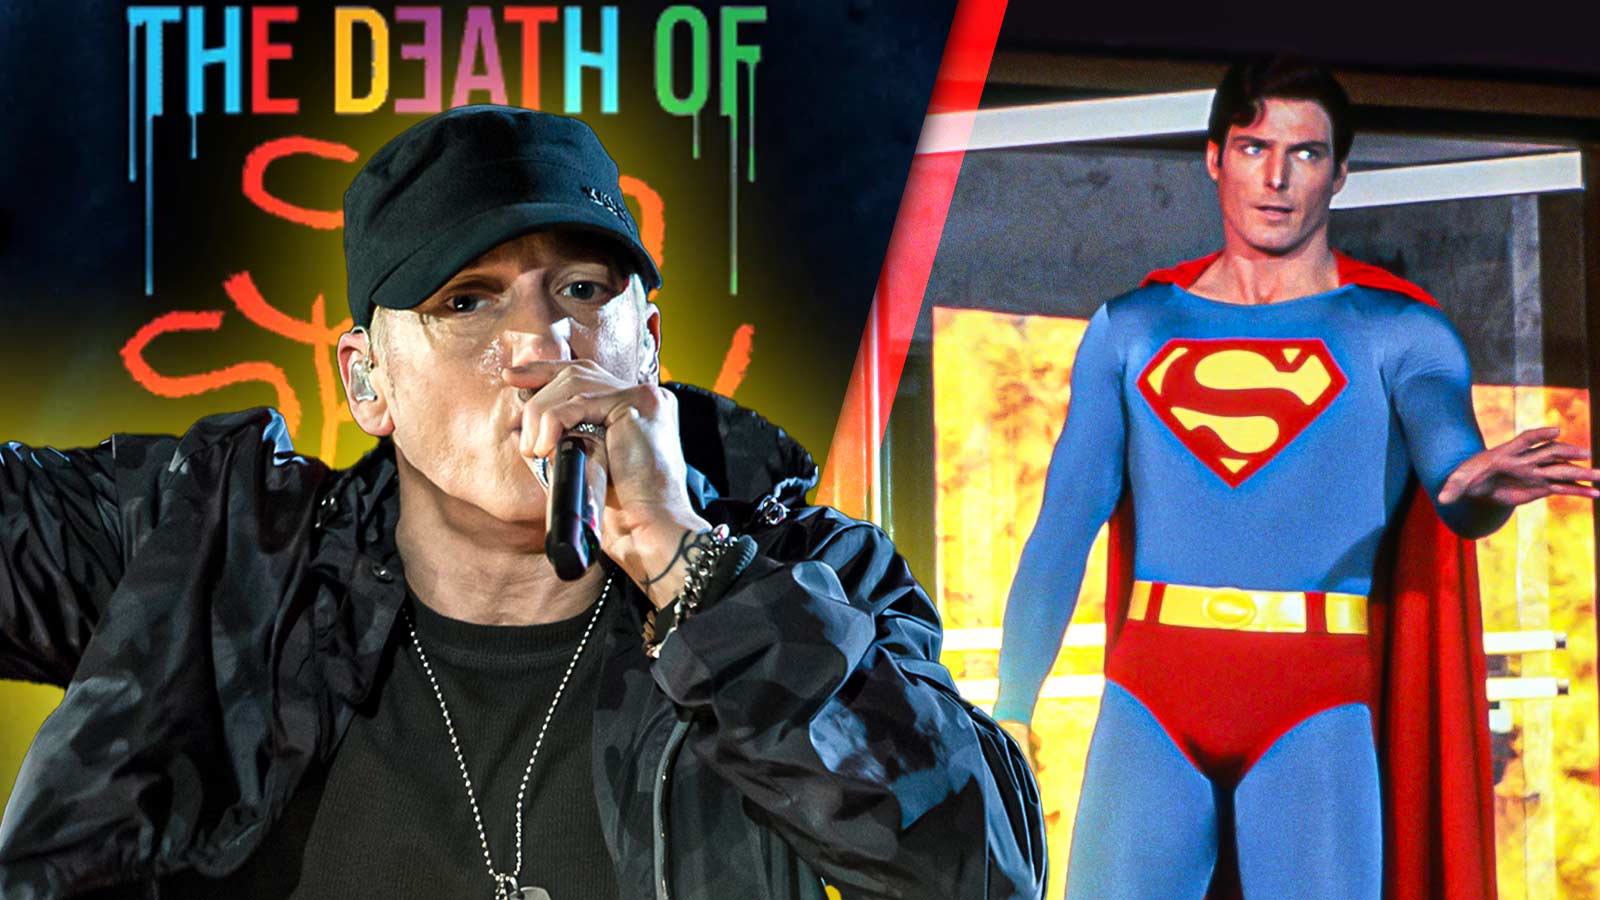 “He ran out of things to say in 2004”: Eminem Won’t Stop Mocking ‘Superman’ Christopher Reeve, New Song in ‘The Death of Slim Shady’ Continues His Bizarre Career Trend